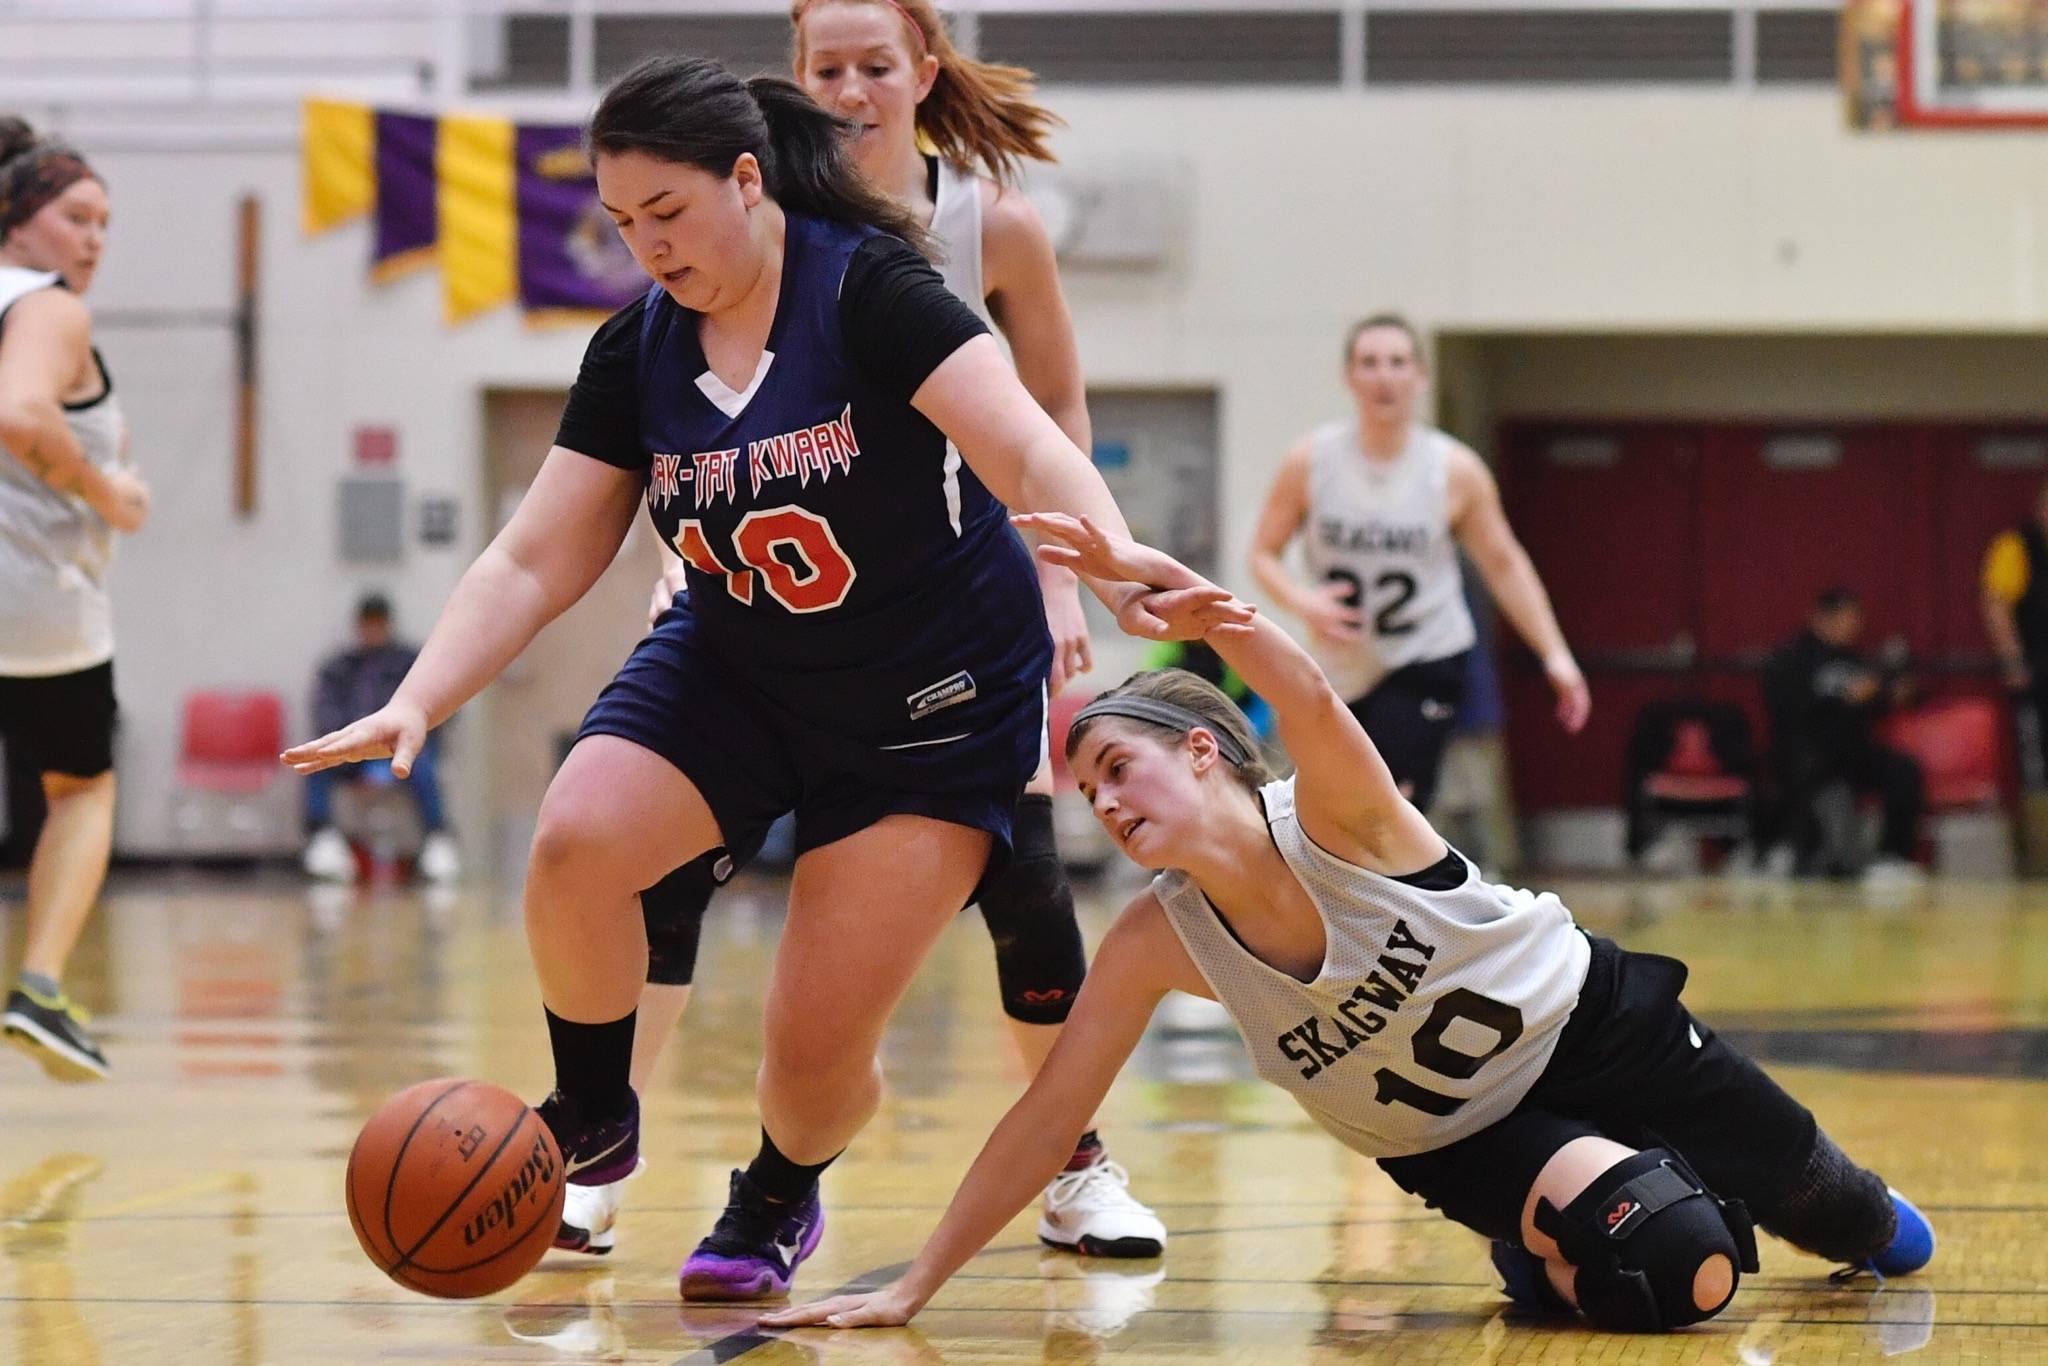 Yakutat’s Nadine Fraker, left, dribbles away from Skagway’s Kaylie Smith during their women’s bracket game at the Lions Club’s Gold Medal Basketball Tournament on Thursday, March 21, 2019. (Michael Penn | Juneau Empire)